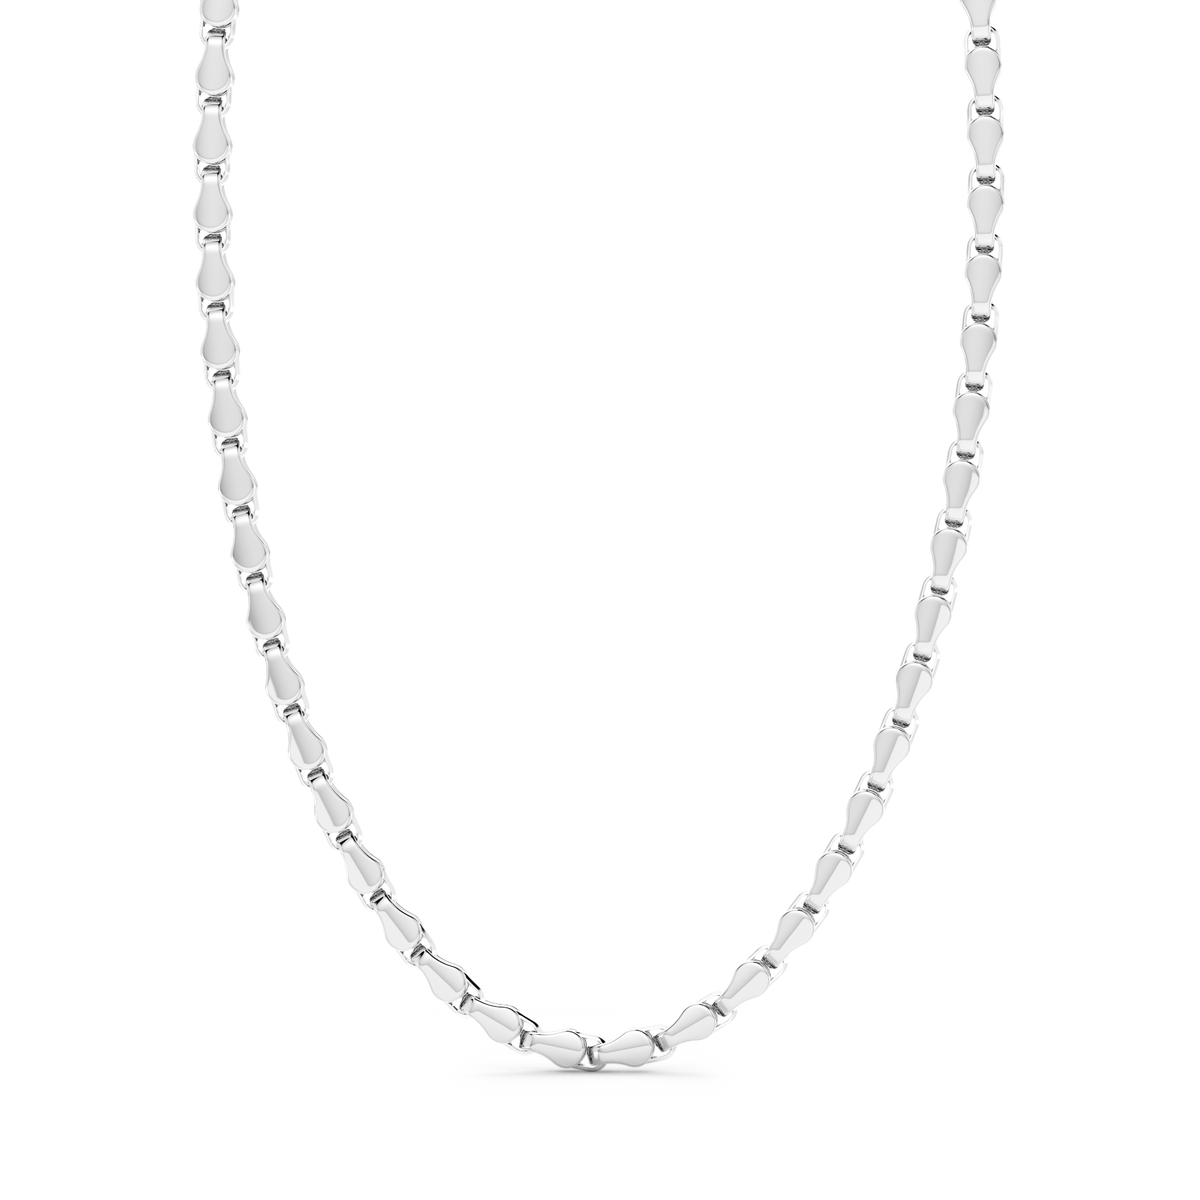 Silver Chain Necklace